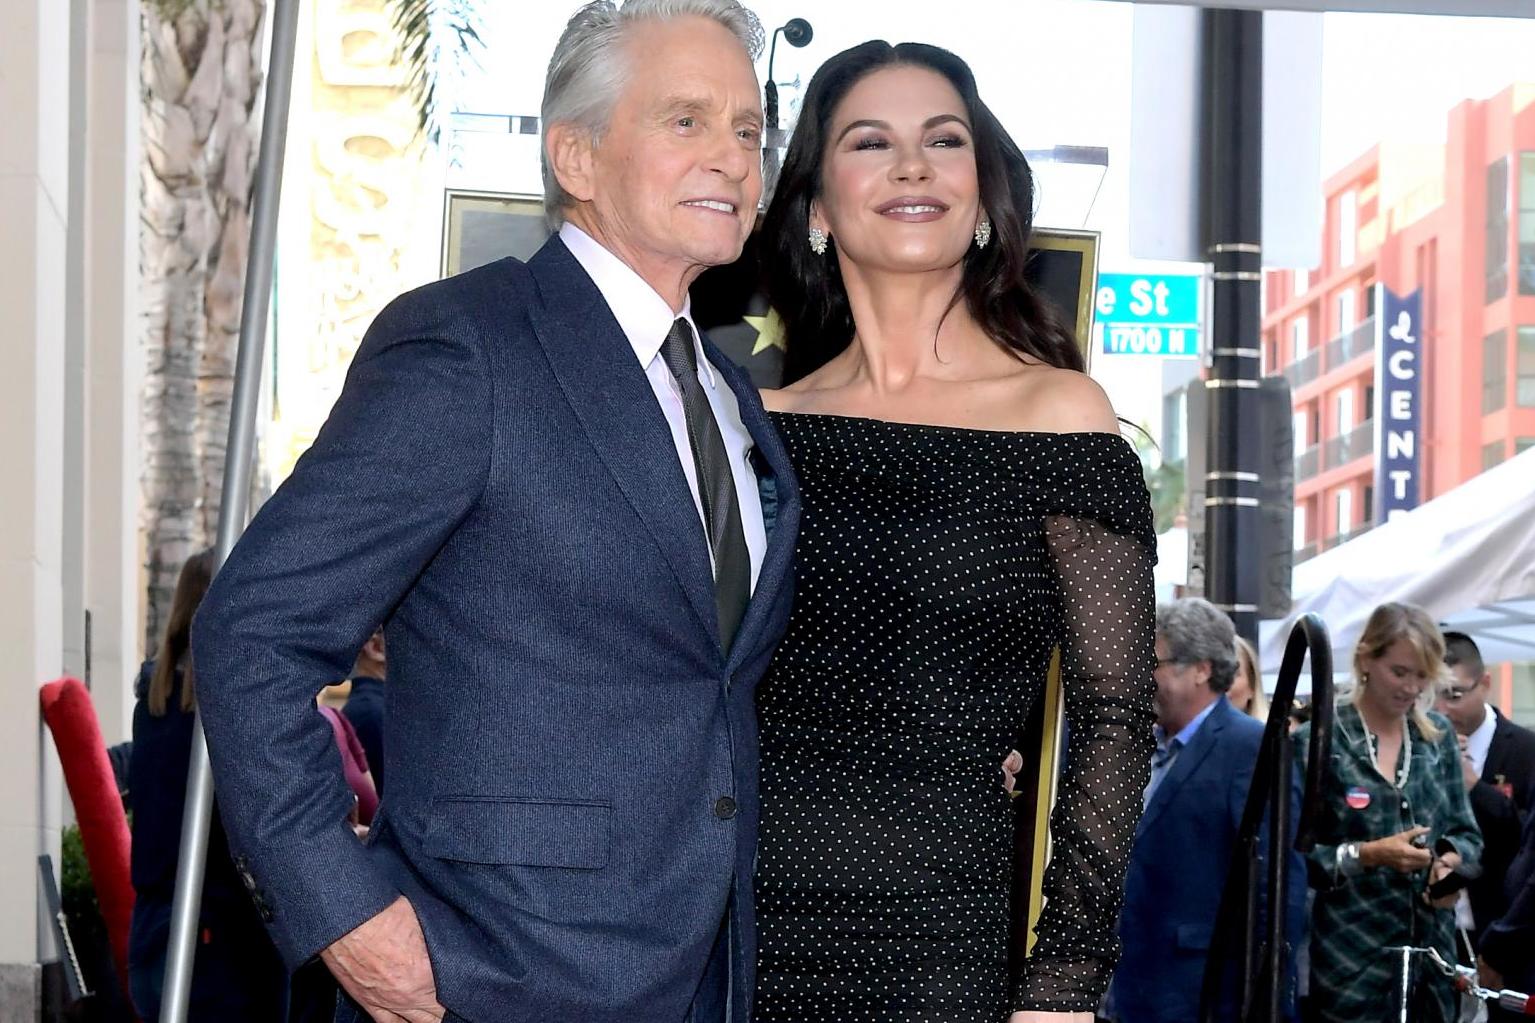 Michael Douglas and Catherine Zeta-Jones pose for a photo at the Hollywood Walk of Fame Ceremony honoring Michael Douglas on Hollywood Boulevard on 6 November, 2018 in Hollywood, California.